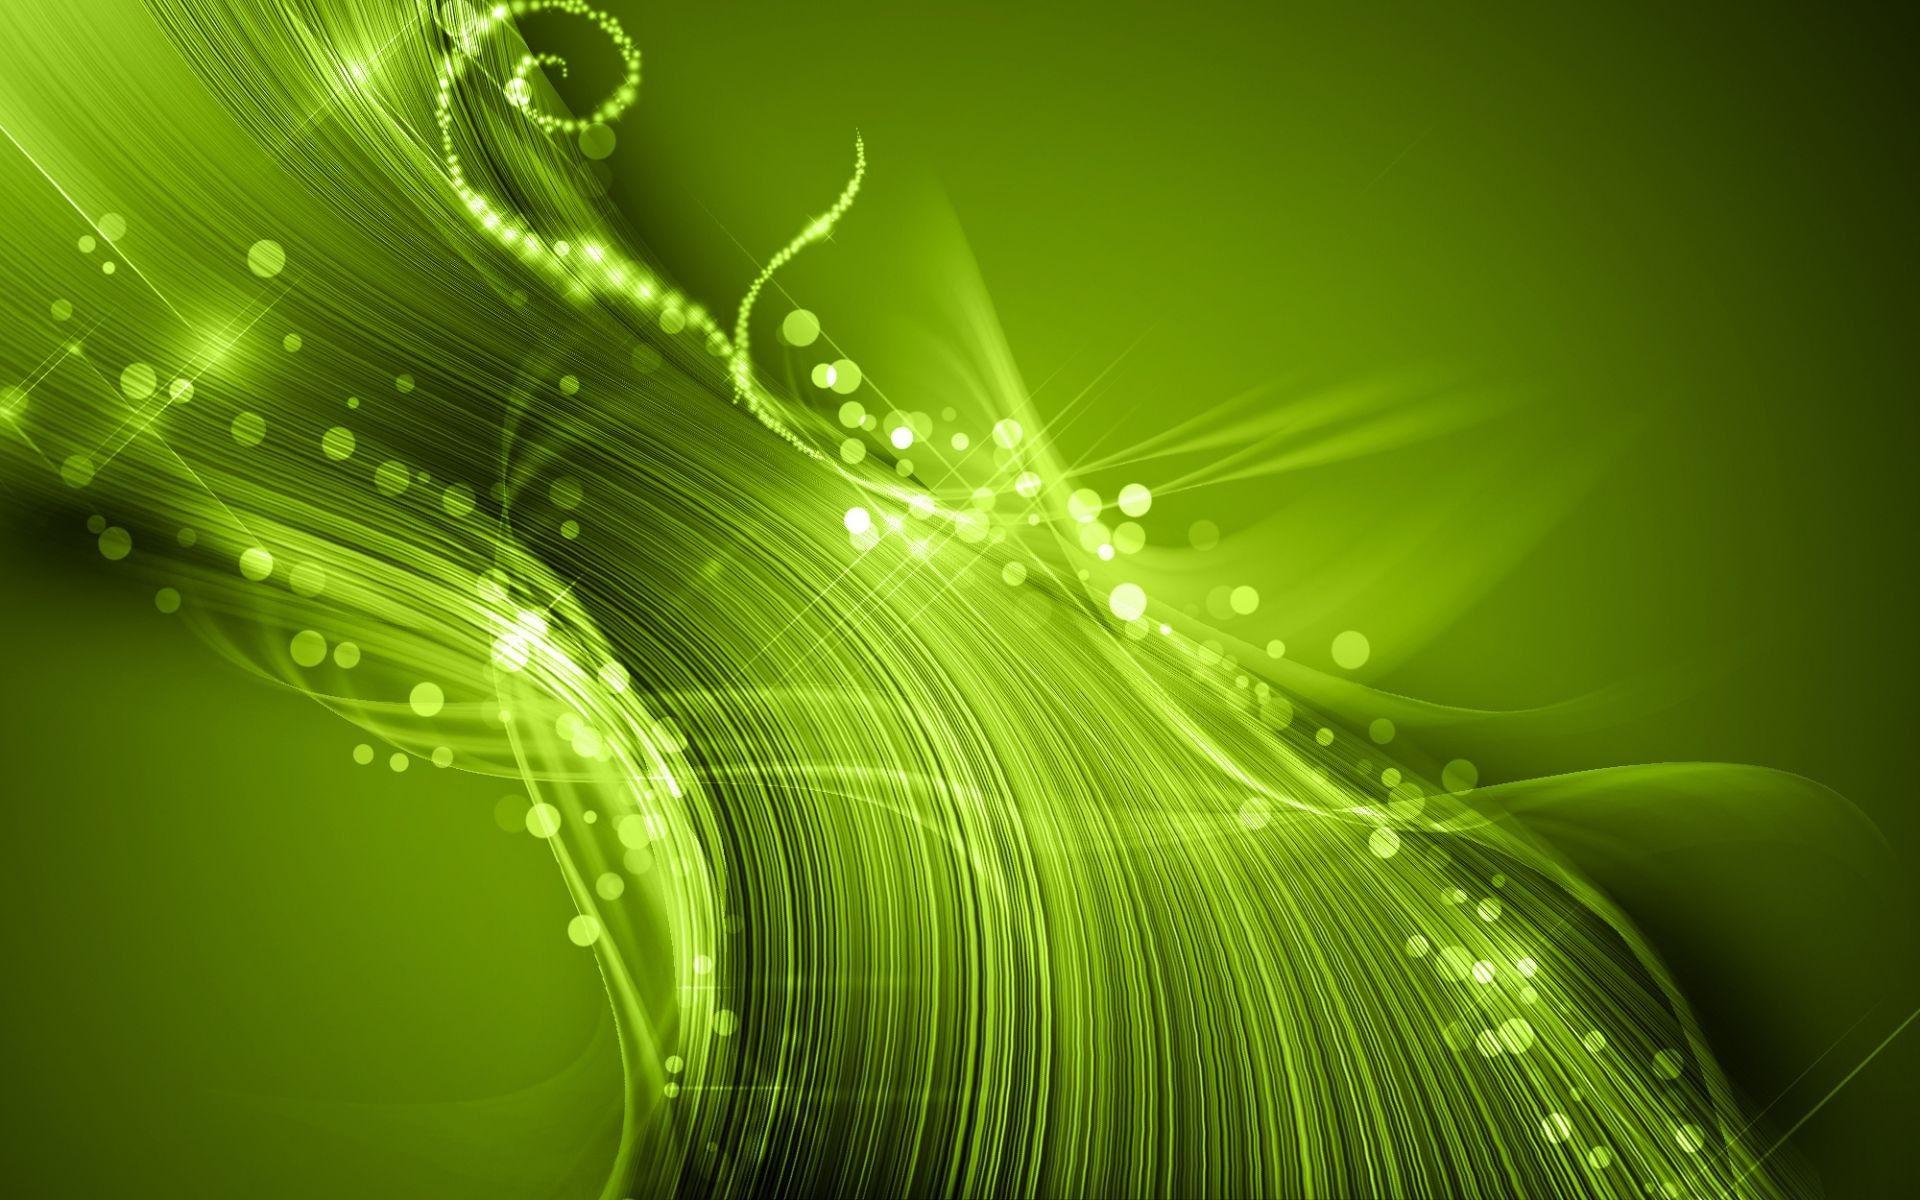 Wallpaper abstraction green Light. Android wallpaper for free